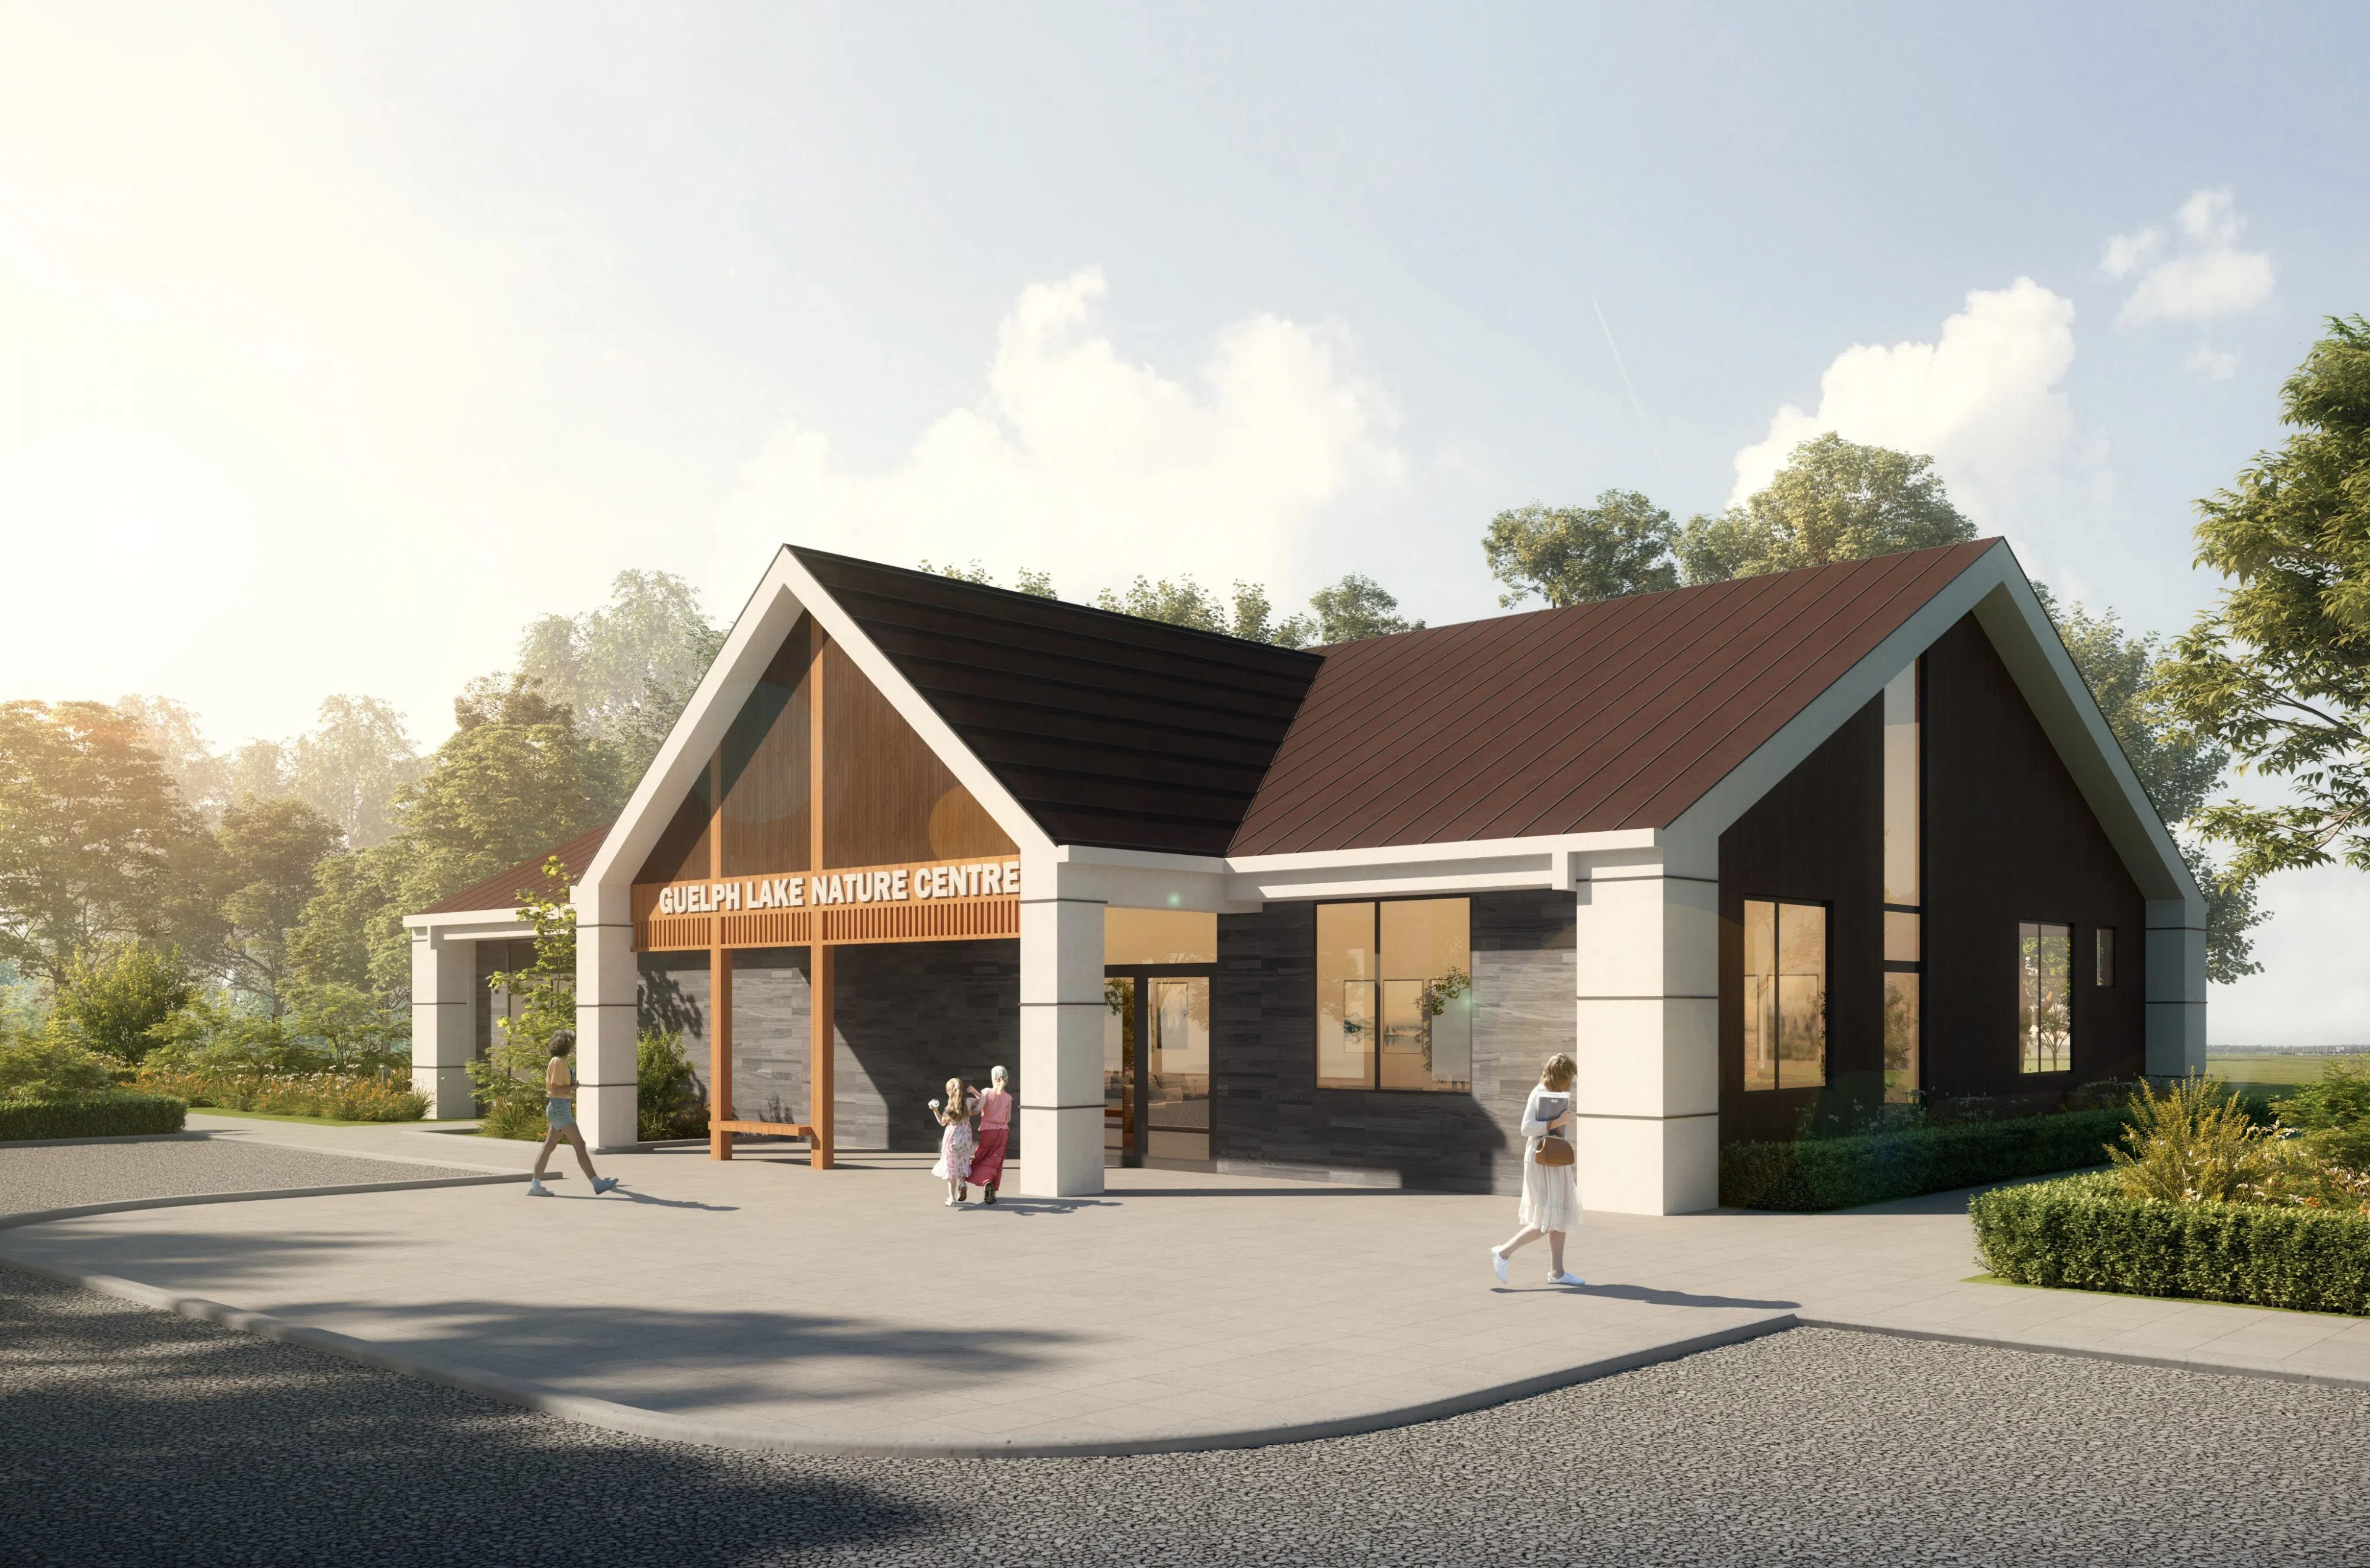 GRCA Breaks Ground on Construction of the New Guelph Lake Nature Centre